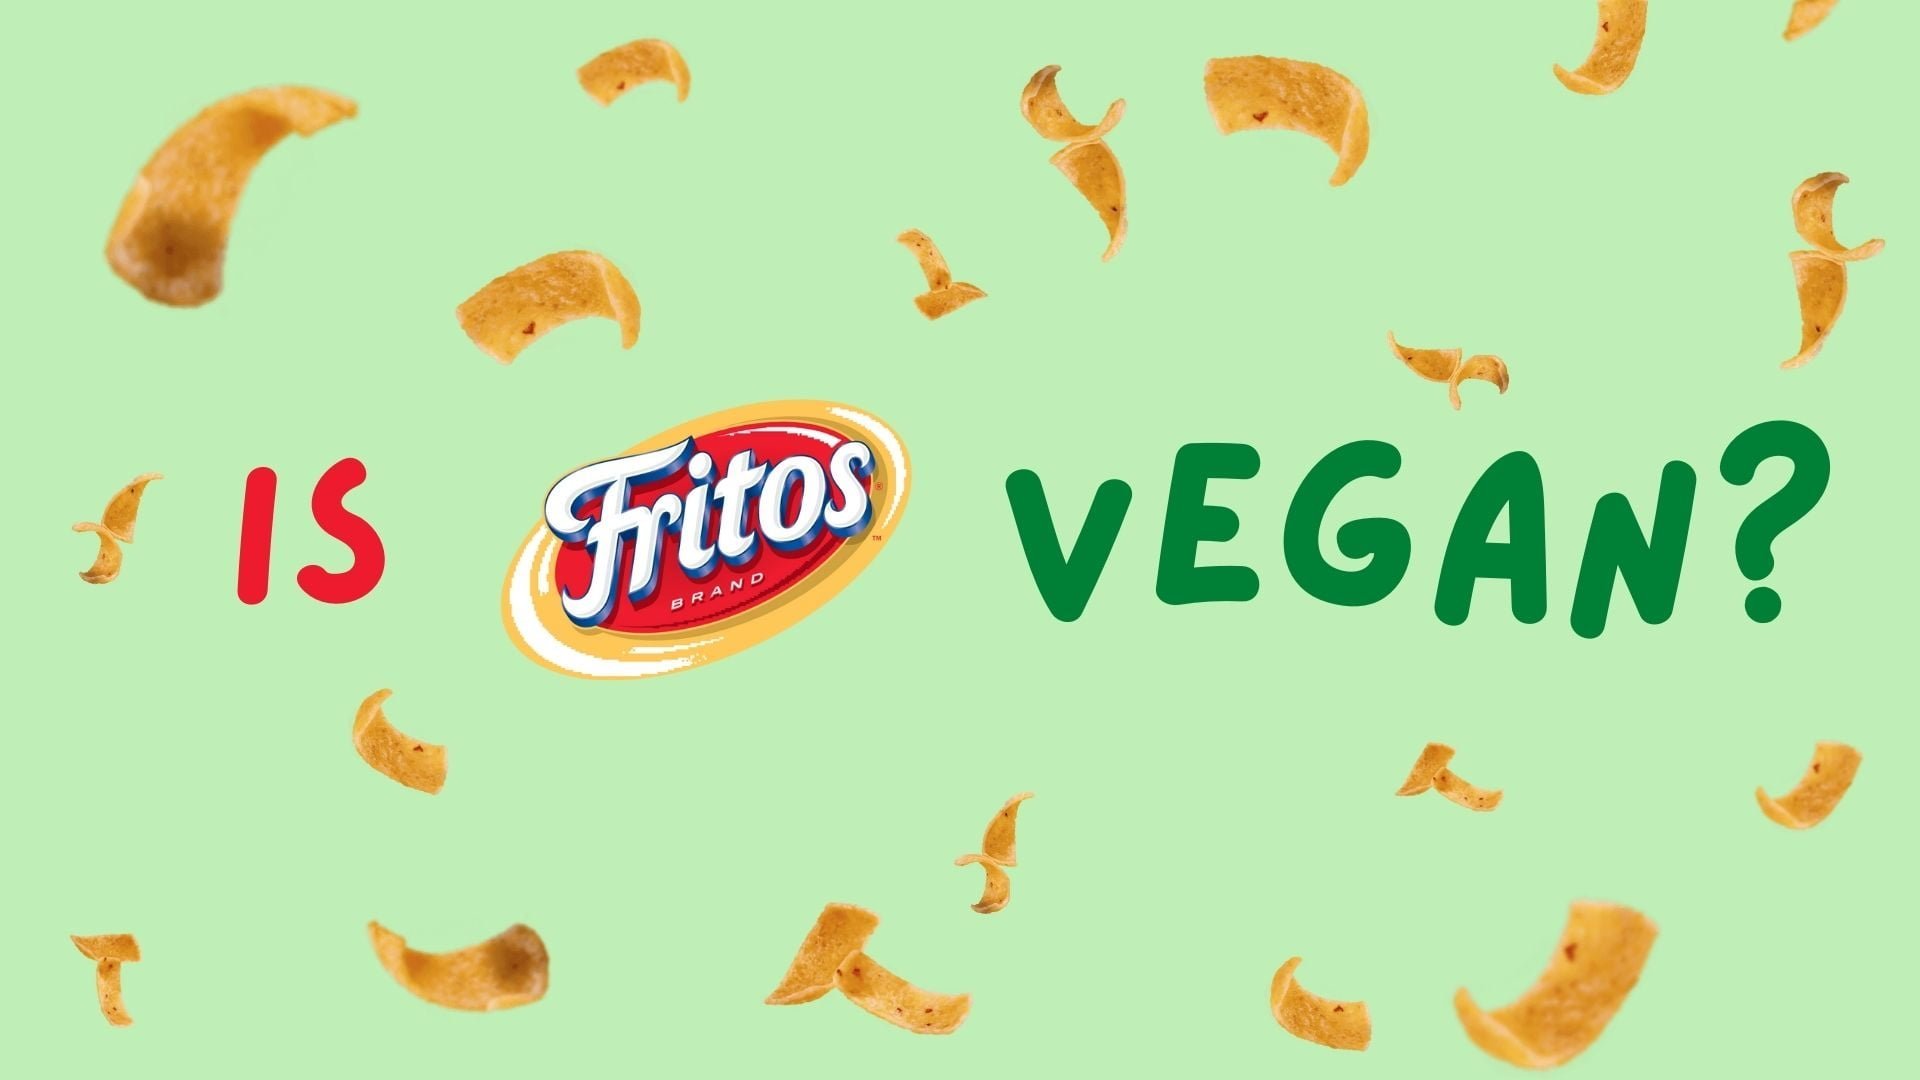 Is Fritos Vegan Or Not? Which Answer Is True?